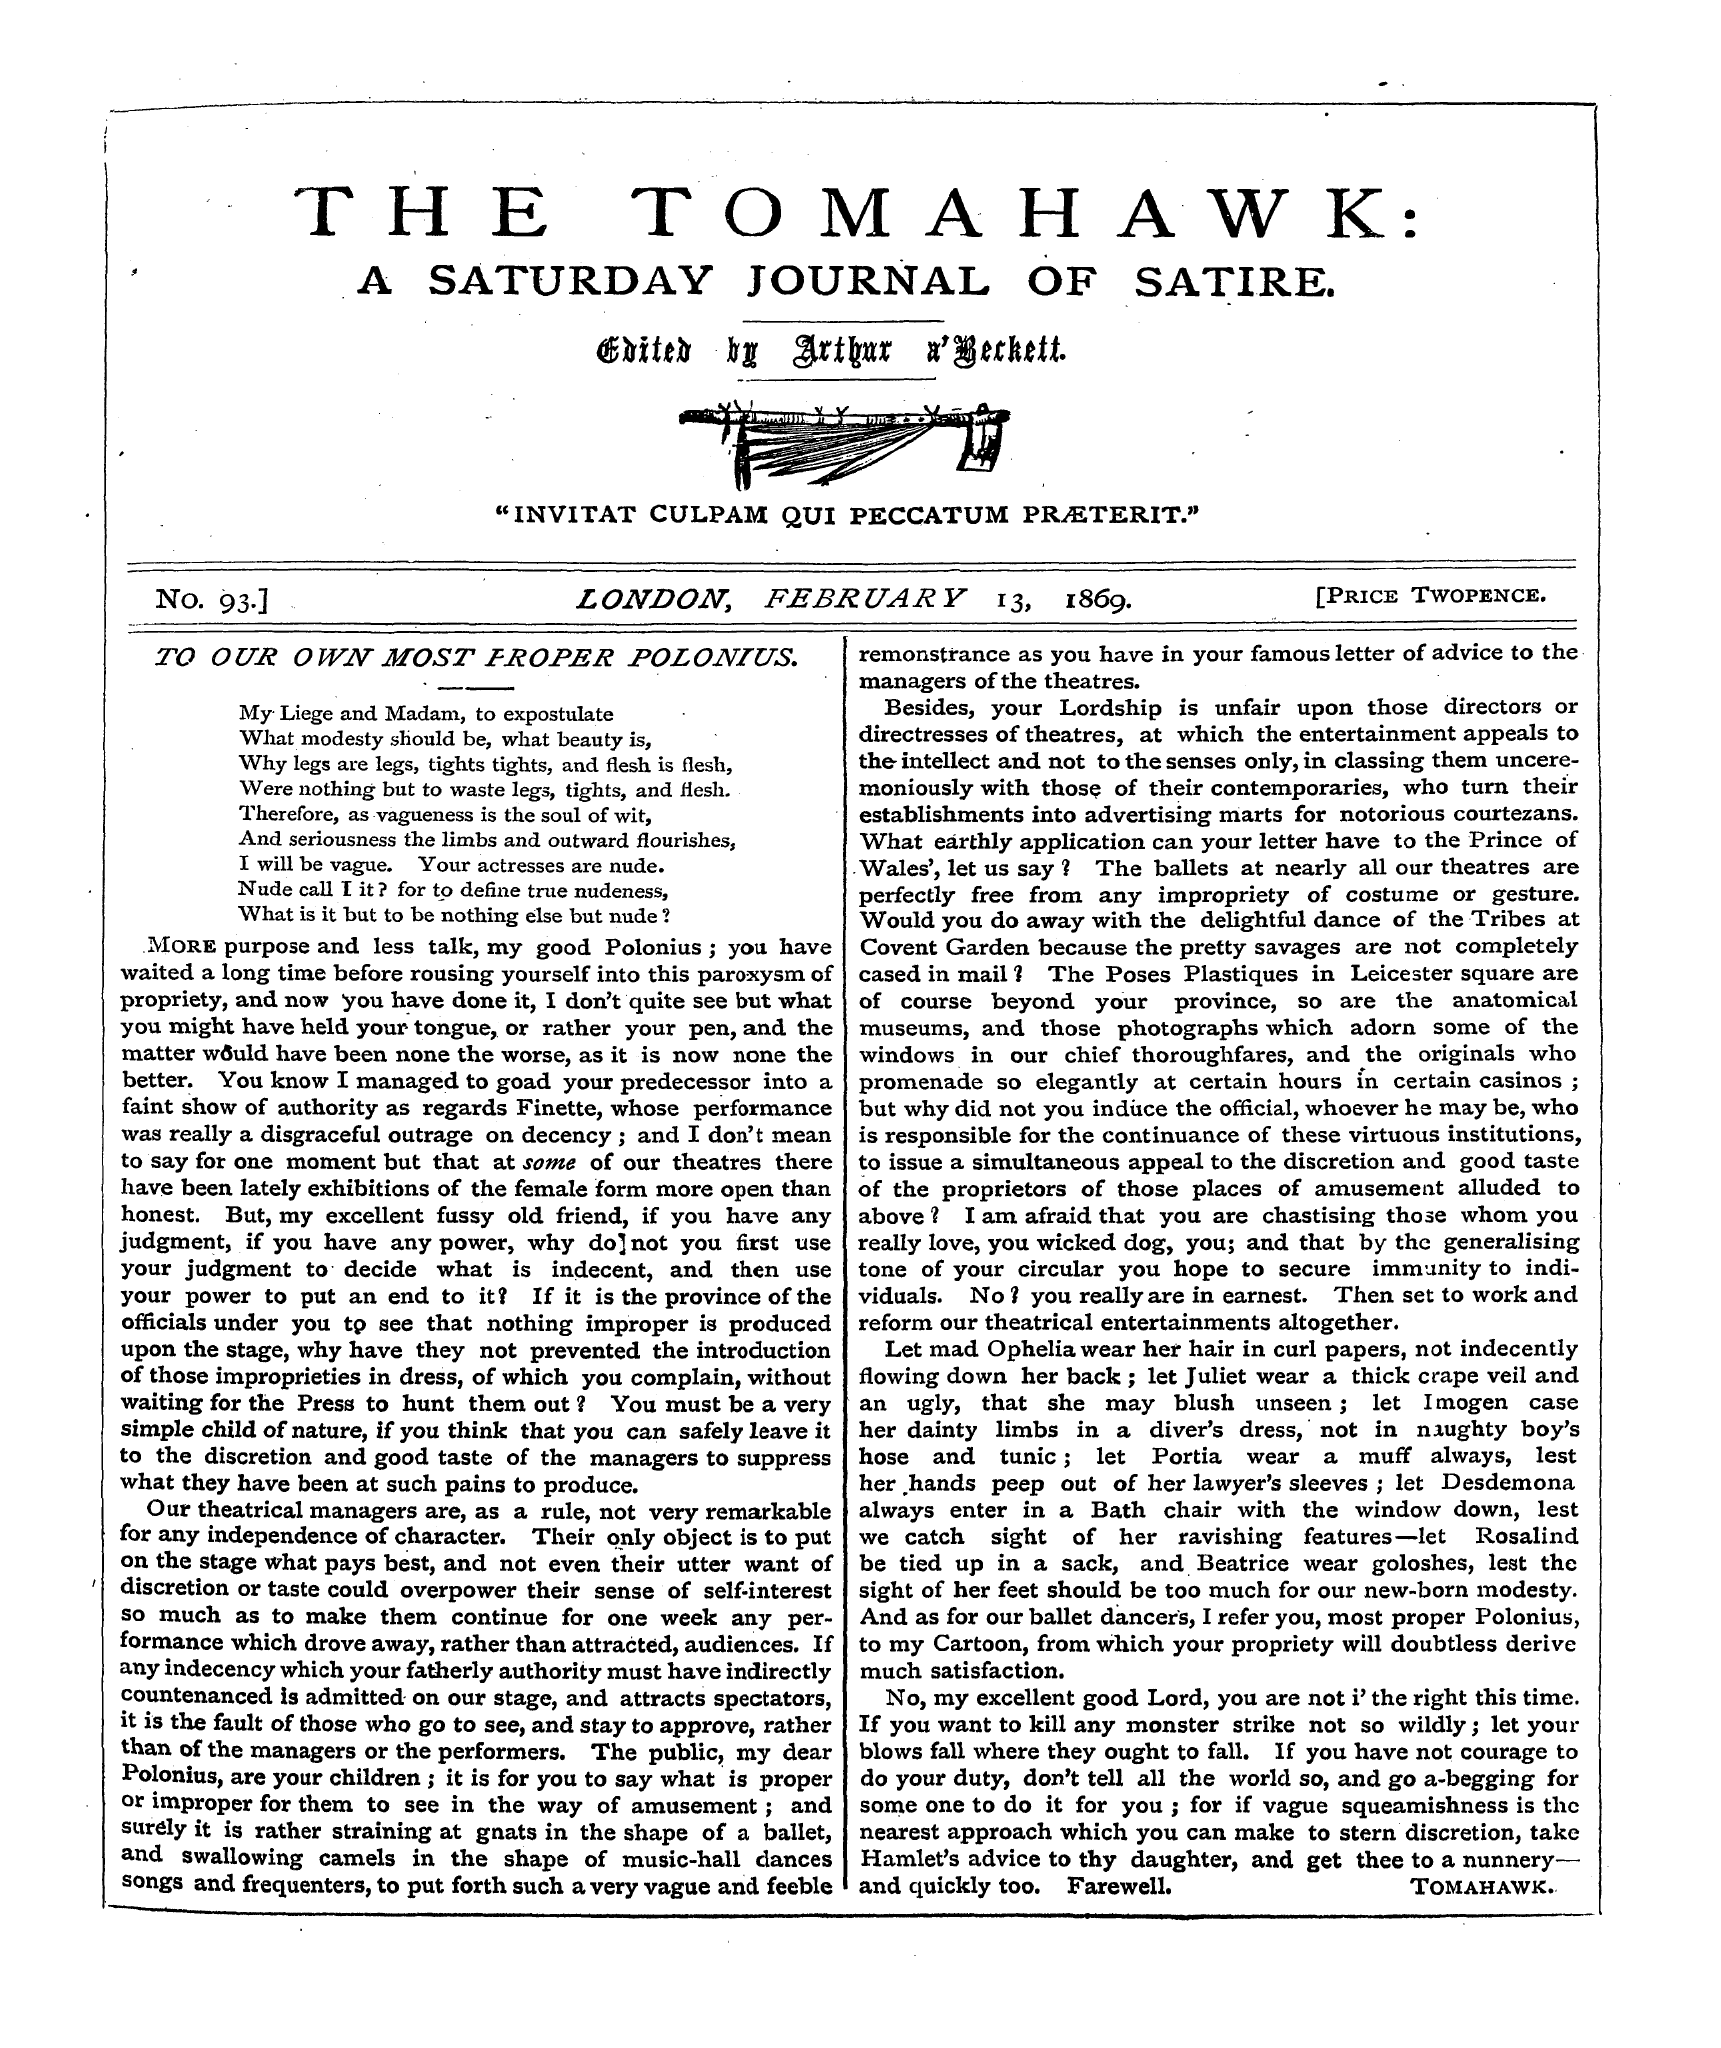 Tomahawk (1867-1870): jS F Y, 1st edition - My Liege And Madam, To Expostulate What ...